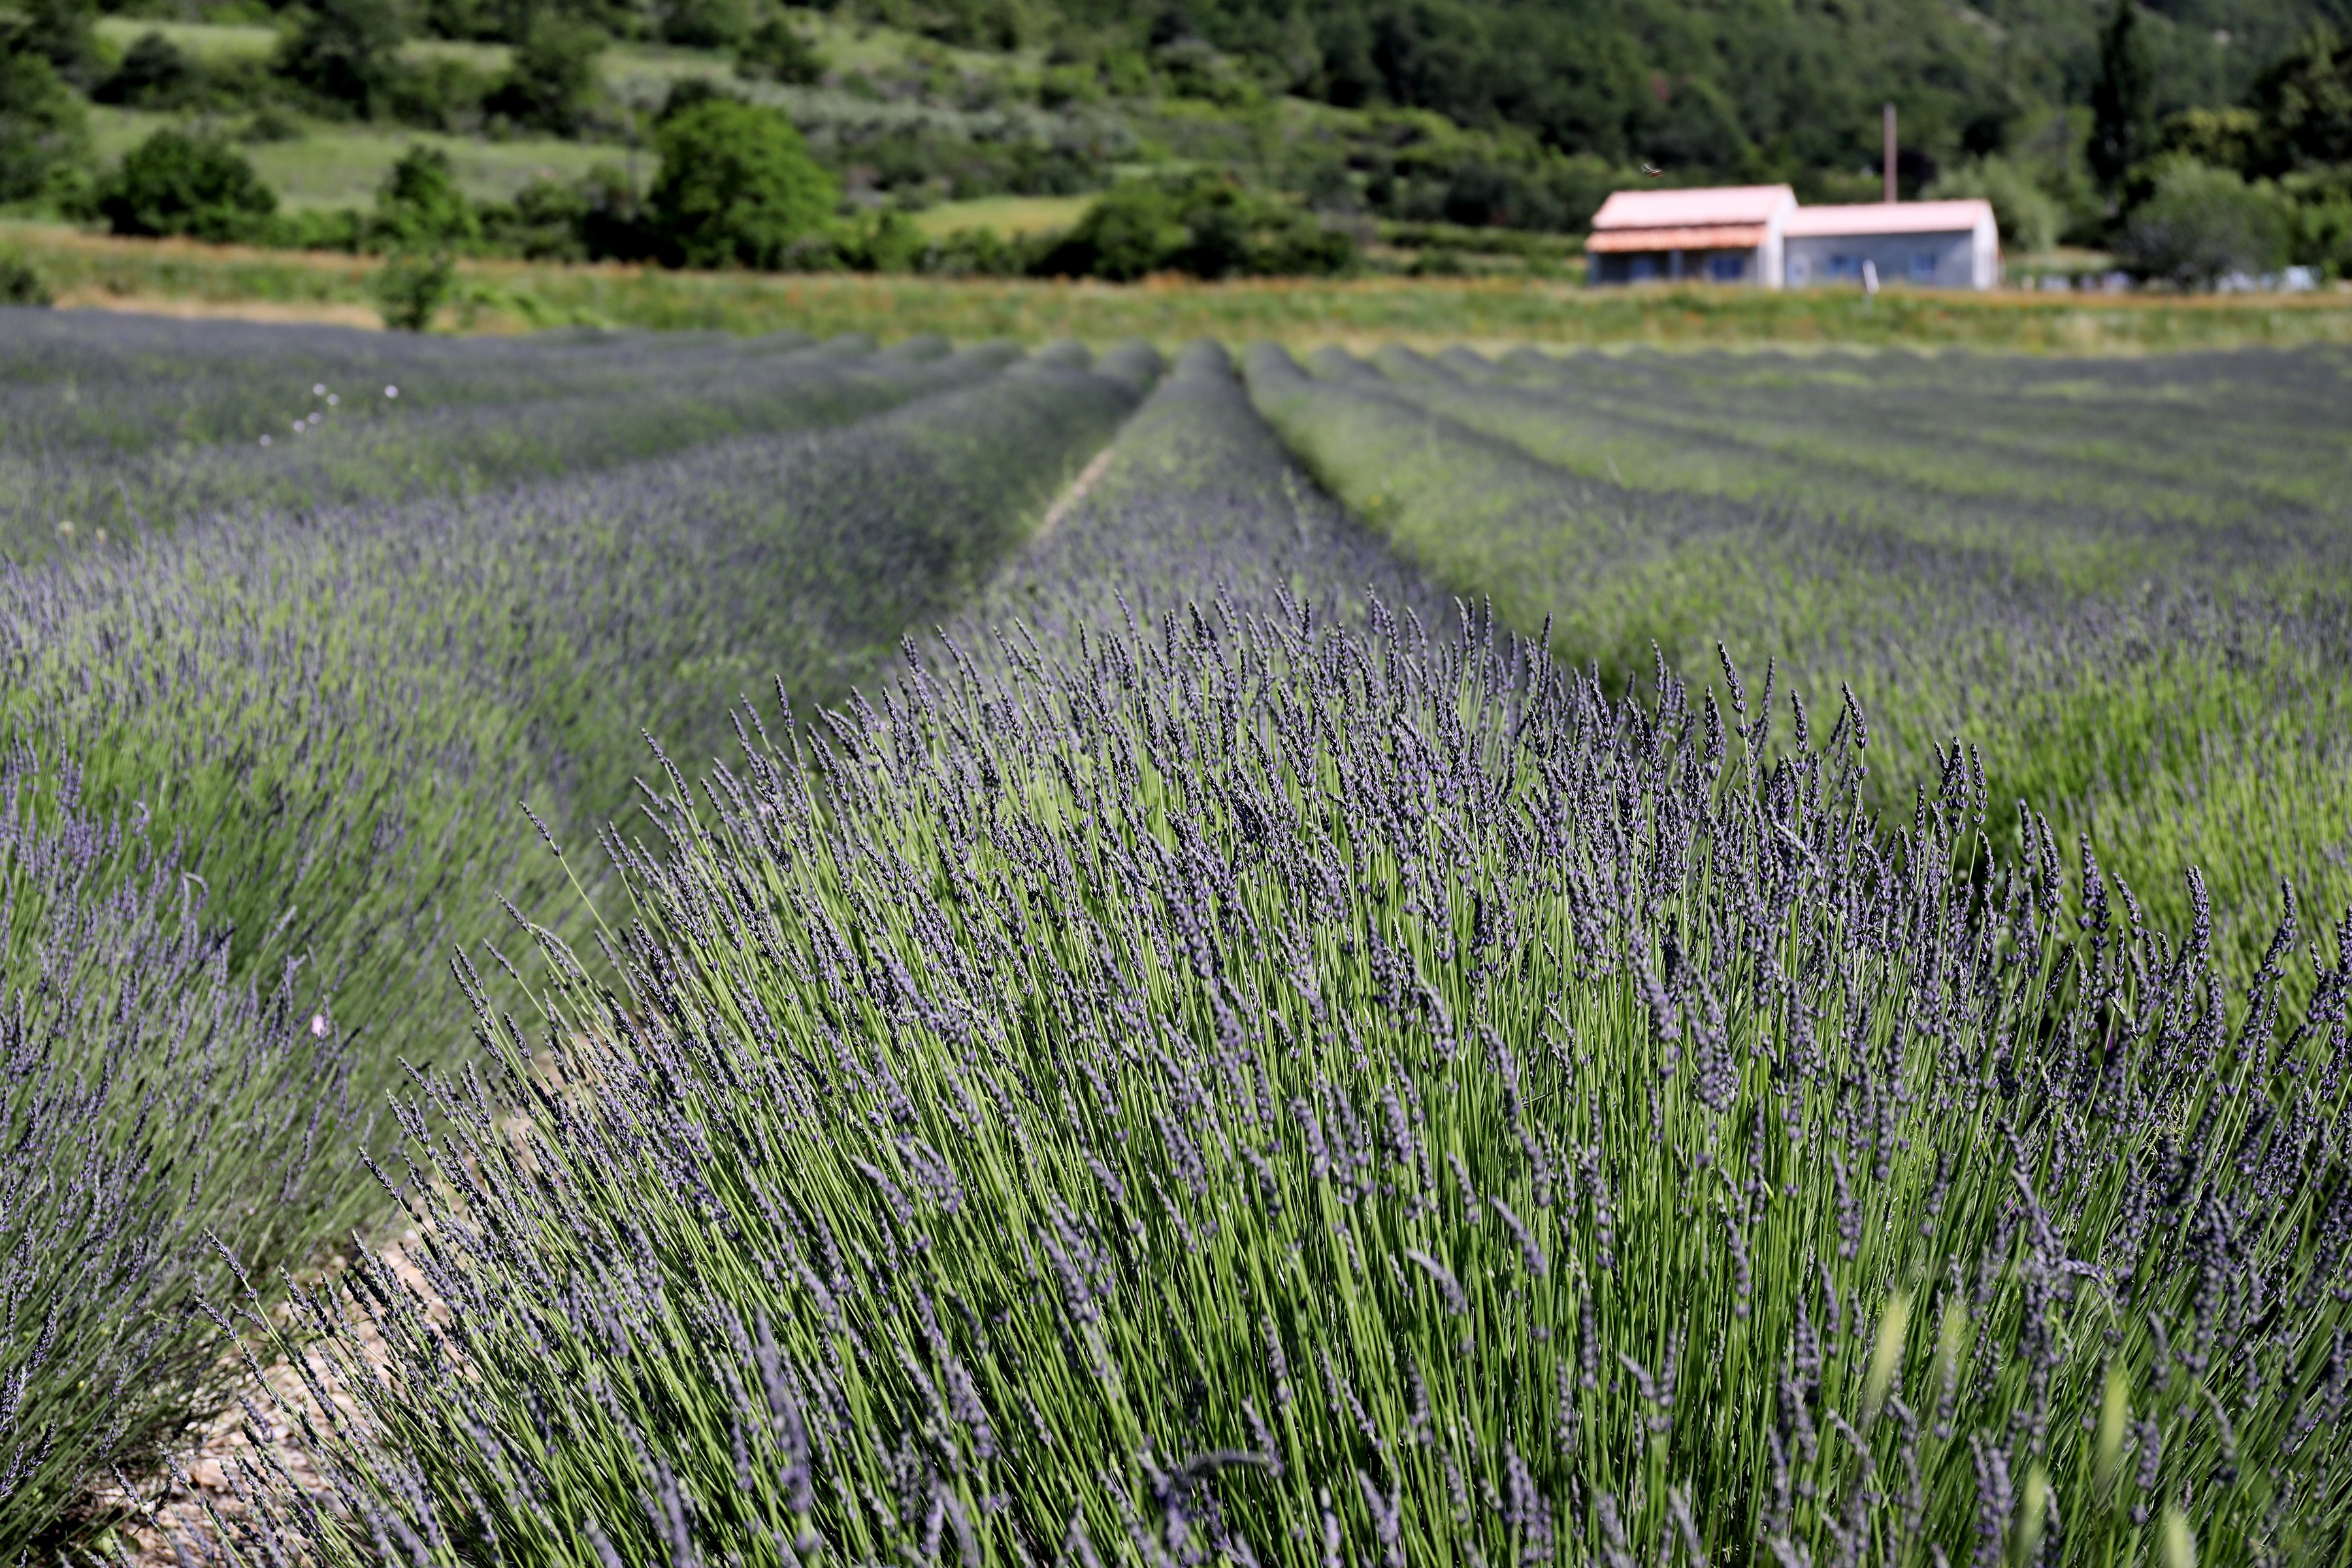 English lavender flowers are blooming in the hills of Italy with their vibrant, purple petals. Rows of organic lavender are ripe for making essential oil and for drying. 